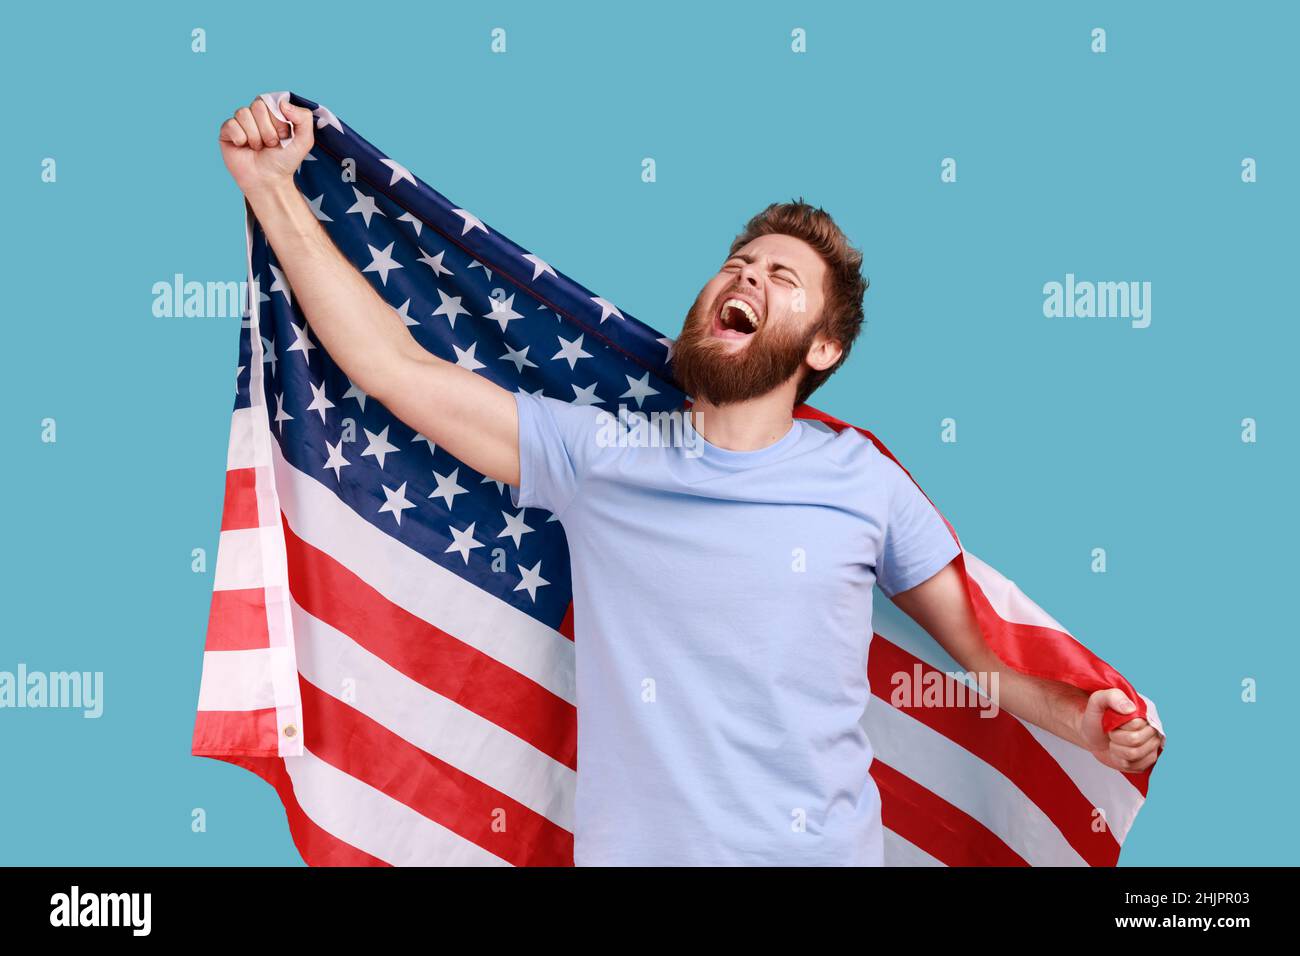 Portrait of delighted satisfied bearded man holing huge american flag and rejoicing while celebrating national holiday, looking up and yelling. Indoor studio shot isolated on blue background. Stock Photo